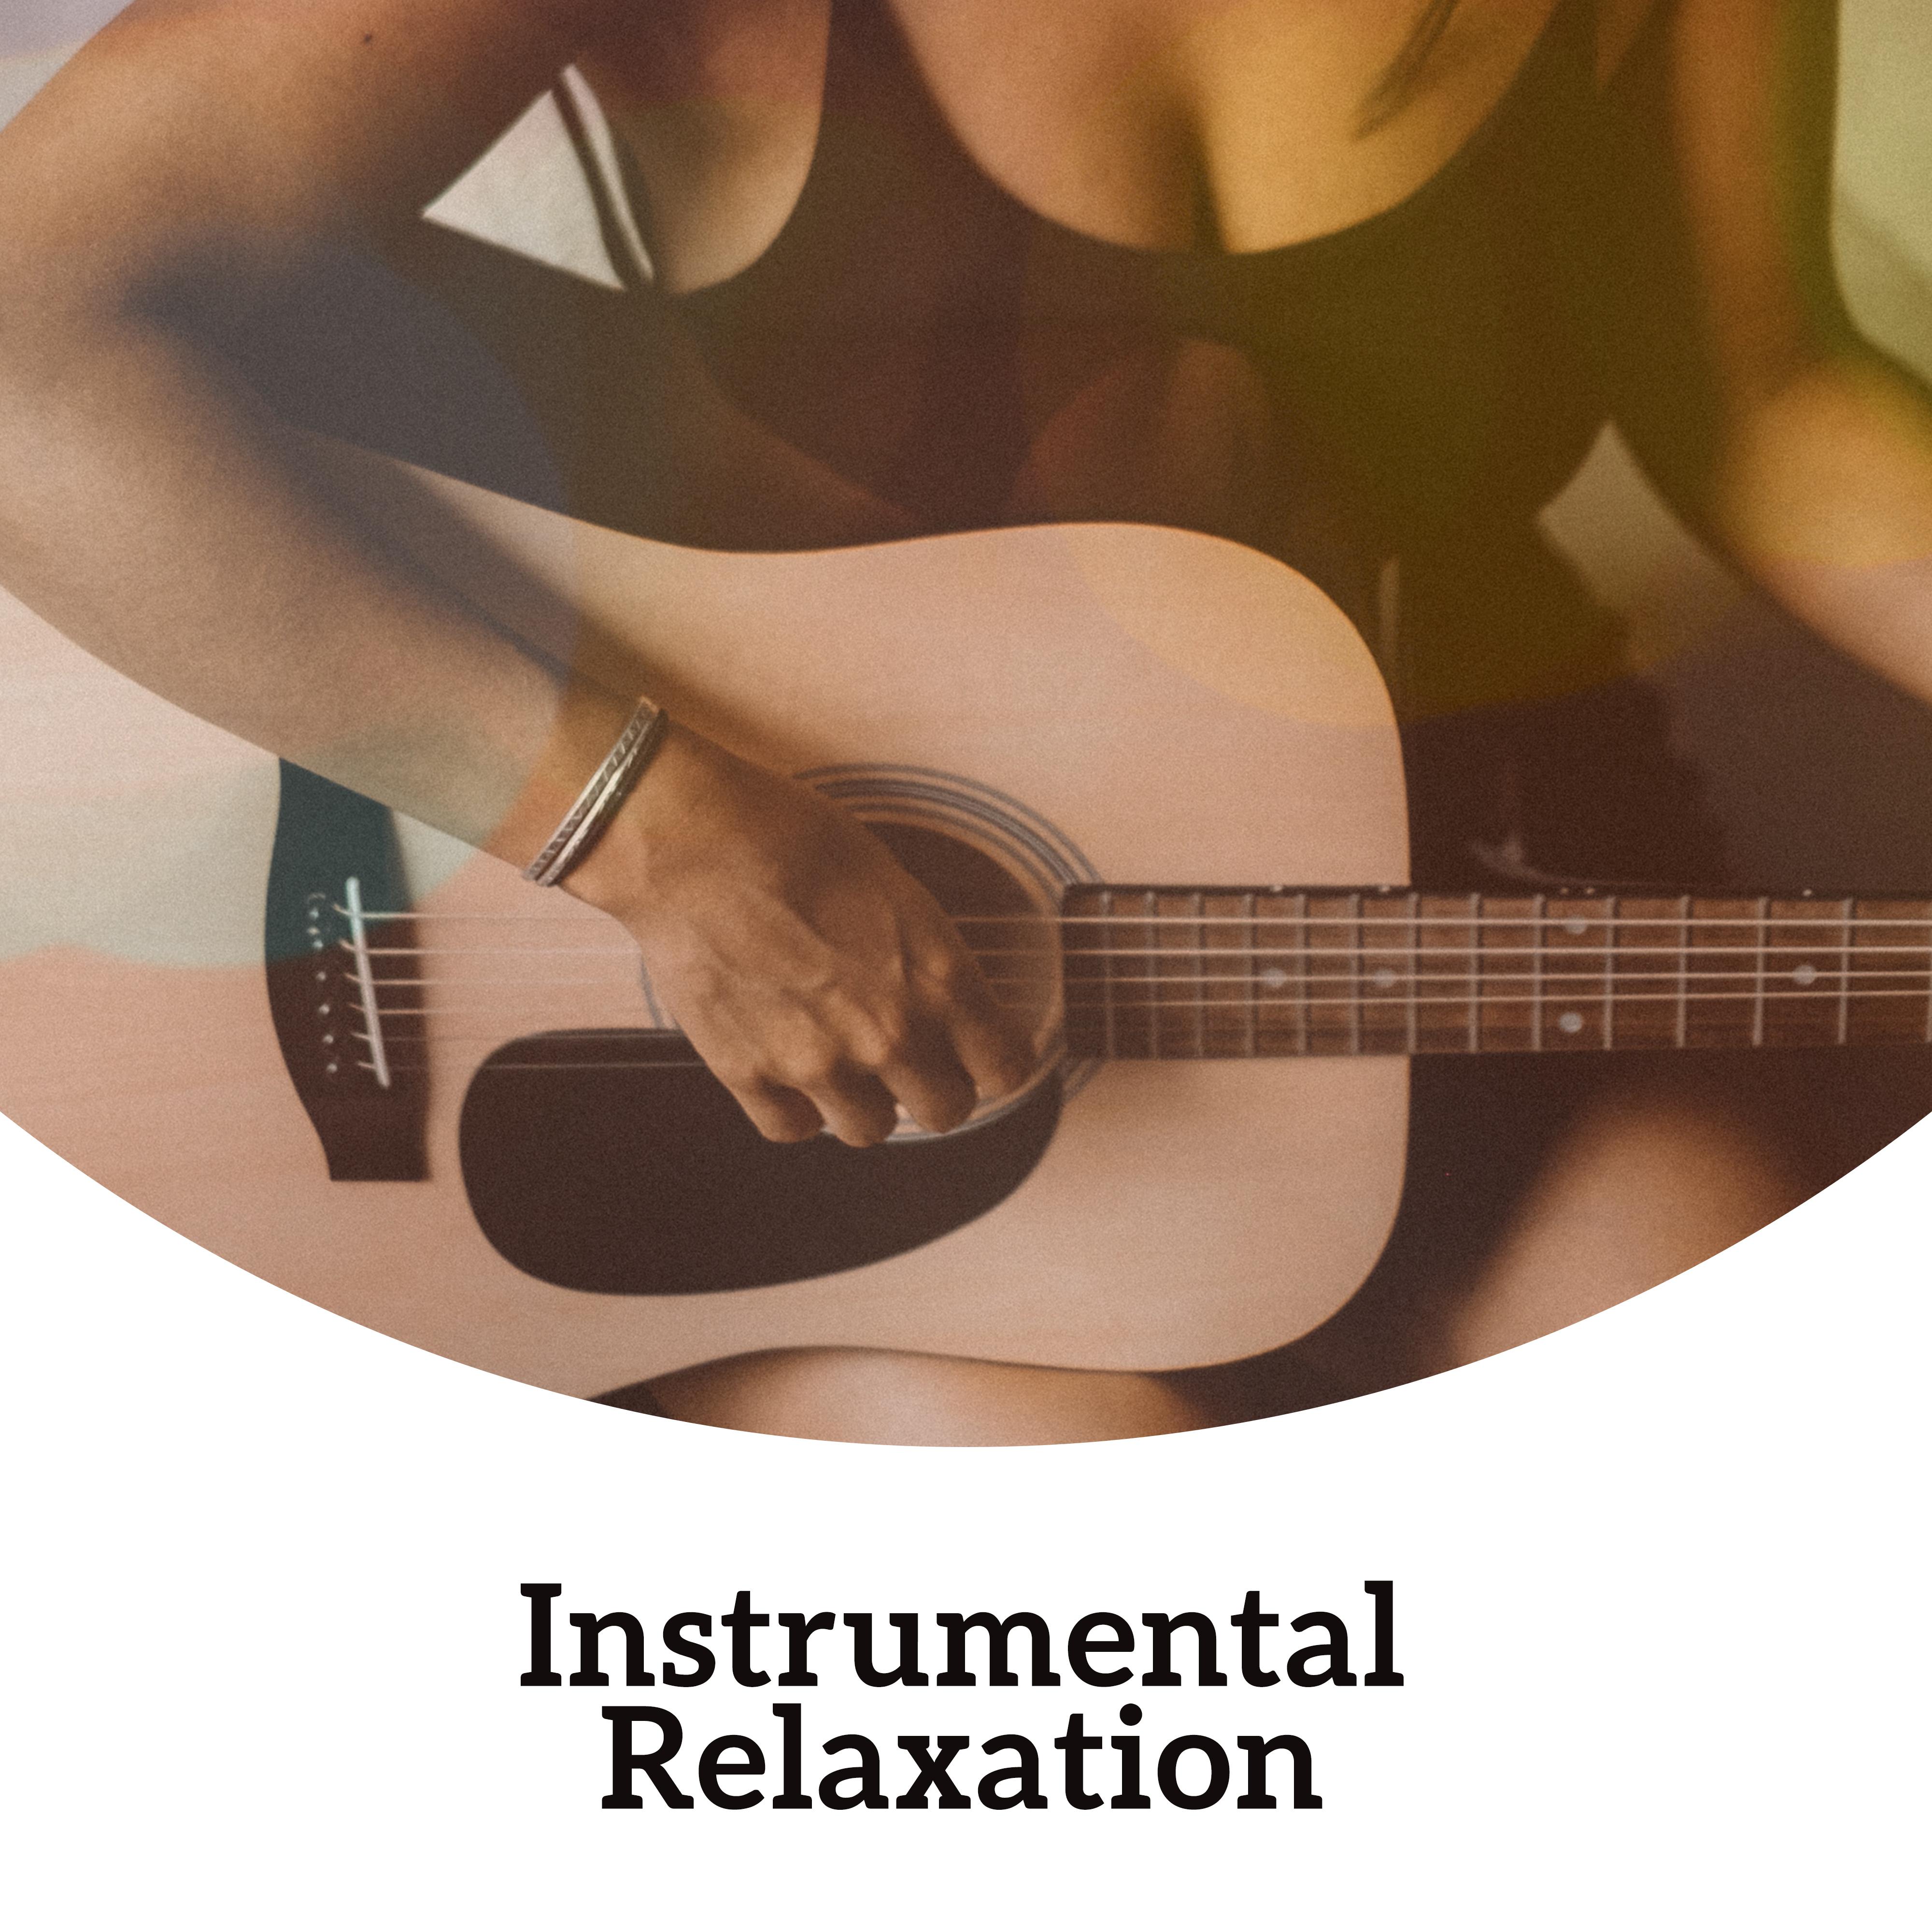 Instrumental Relaxation  Zen Sounds, Energy for Mind, Sounds of Nature Reduce Stress, New Age